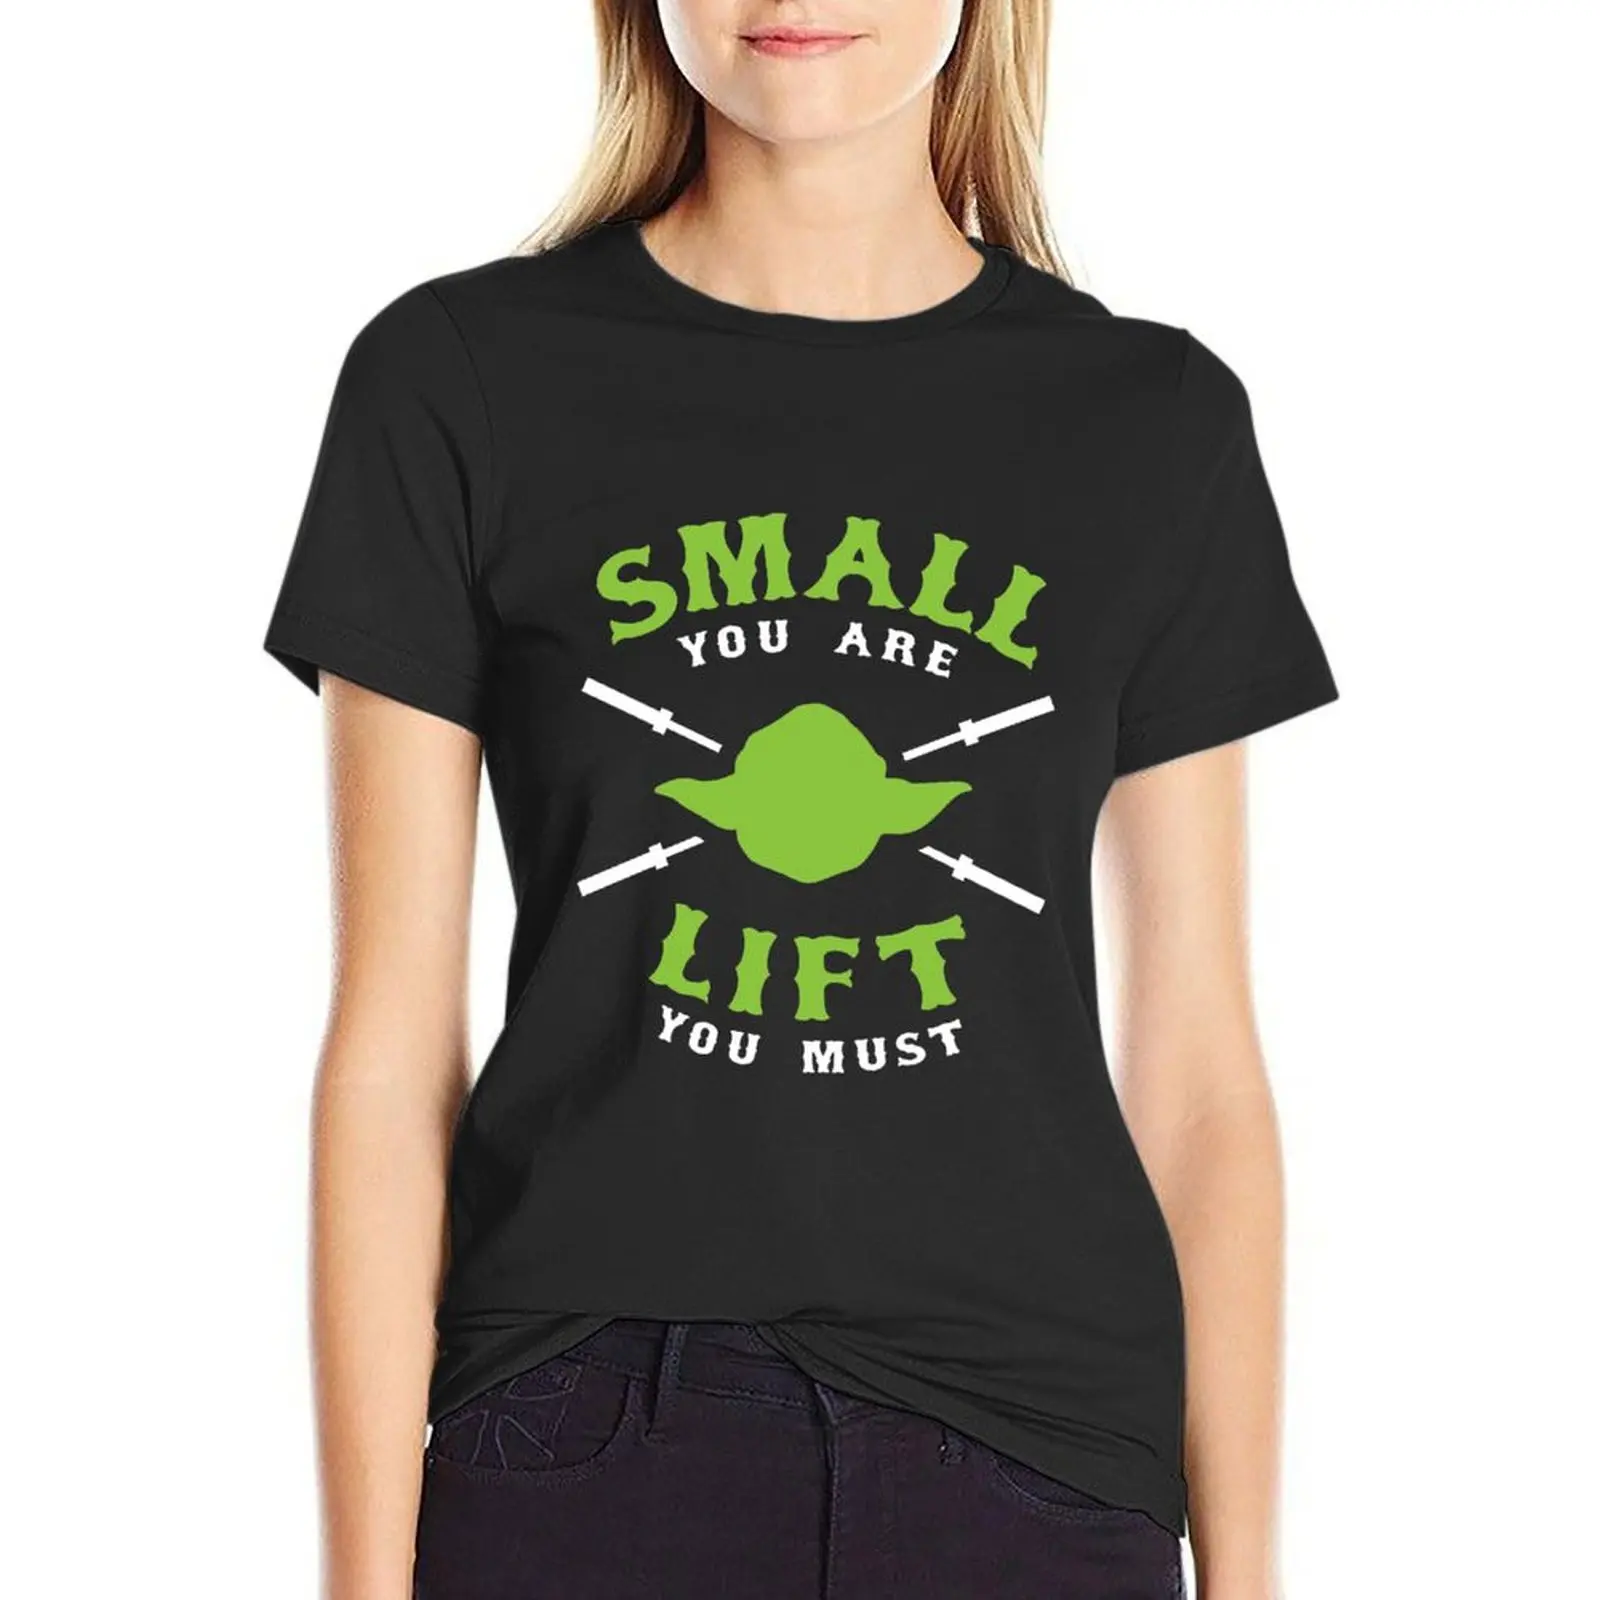 

Small You Are Lift You Must Racerback T-shirt summer clothes summer top Women tops